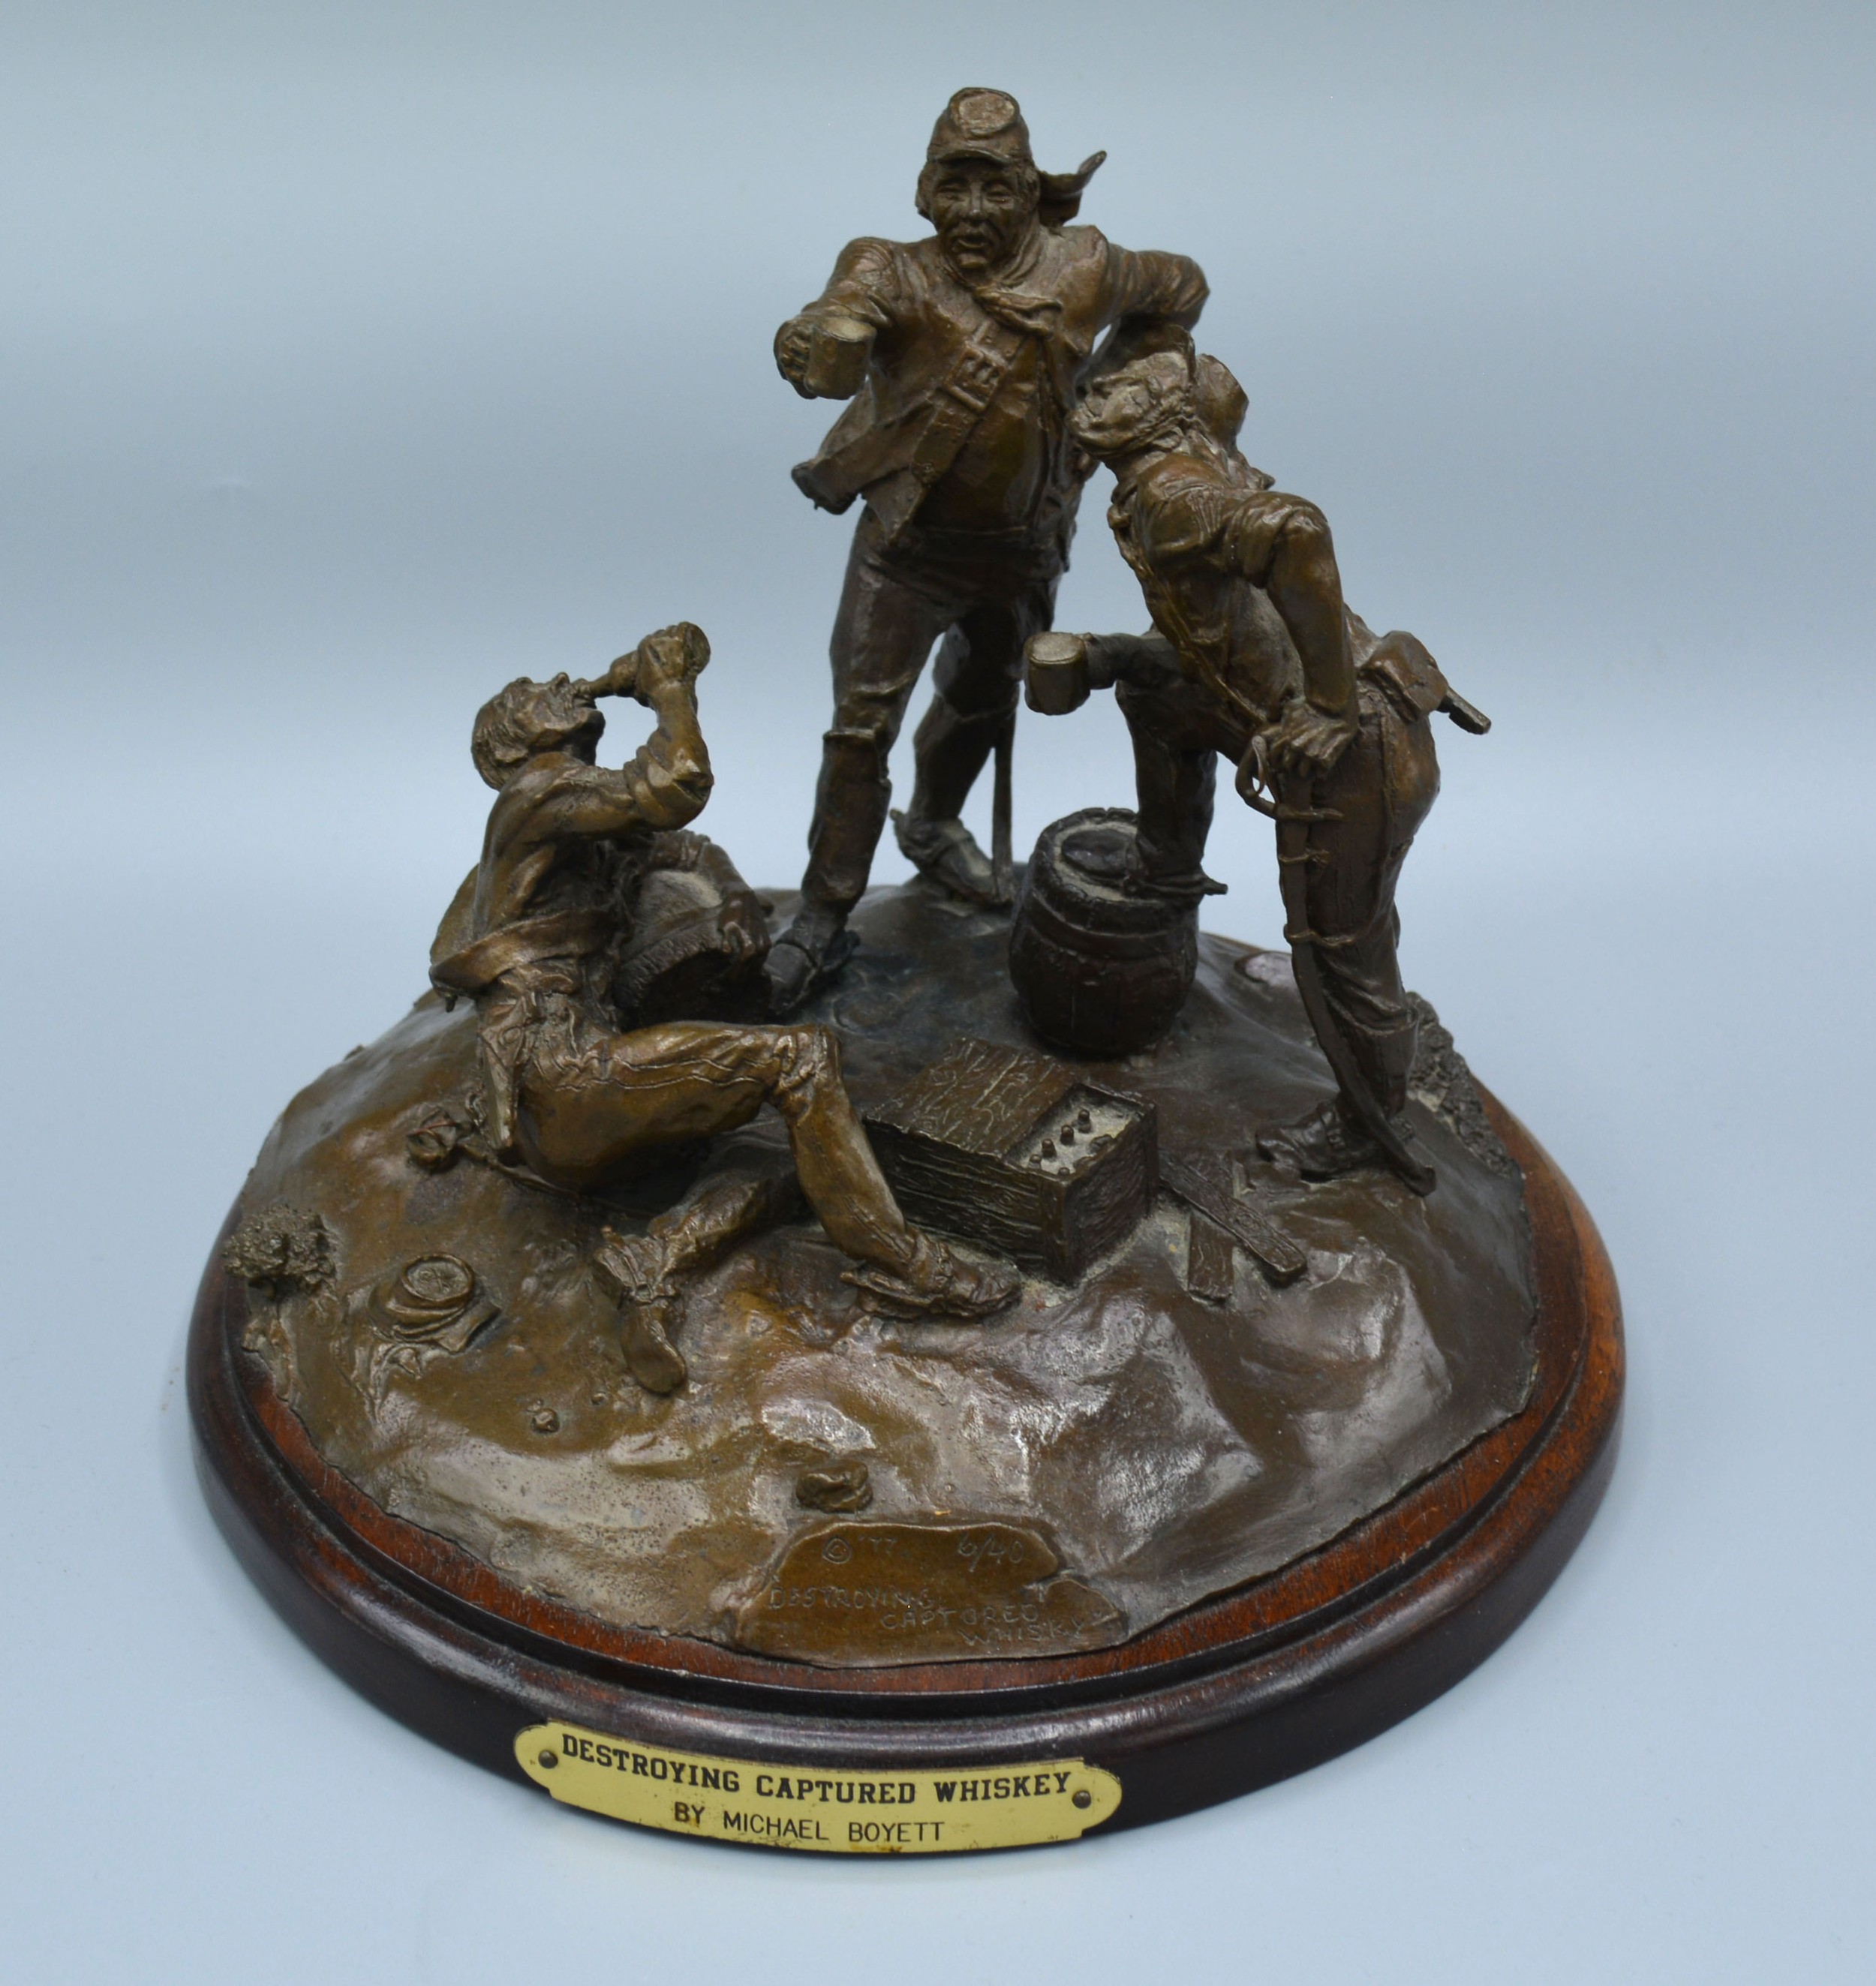 Michael Boyett 'Destroying Captured Whisky' patinated bronze group, limited edition number 6 of